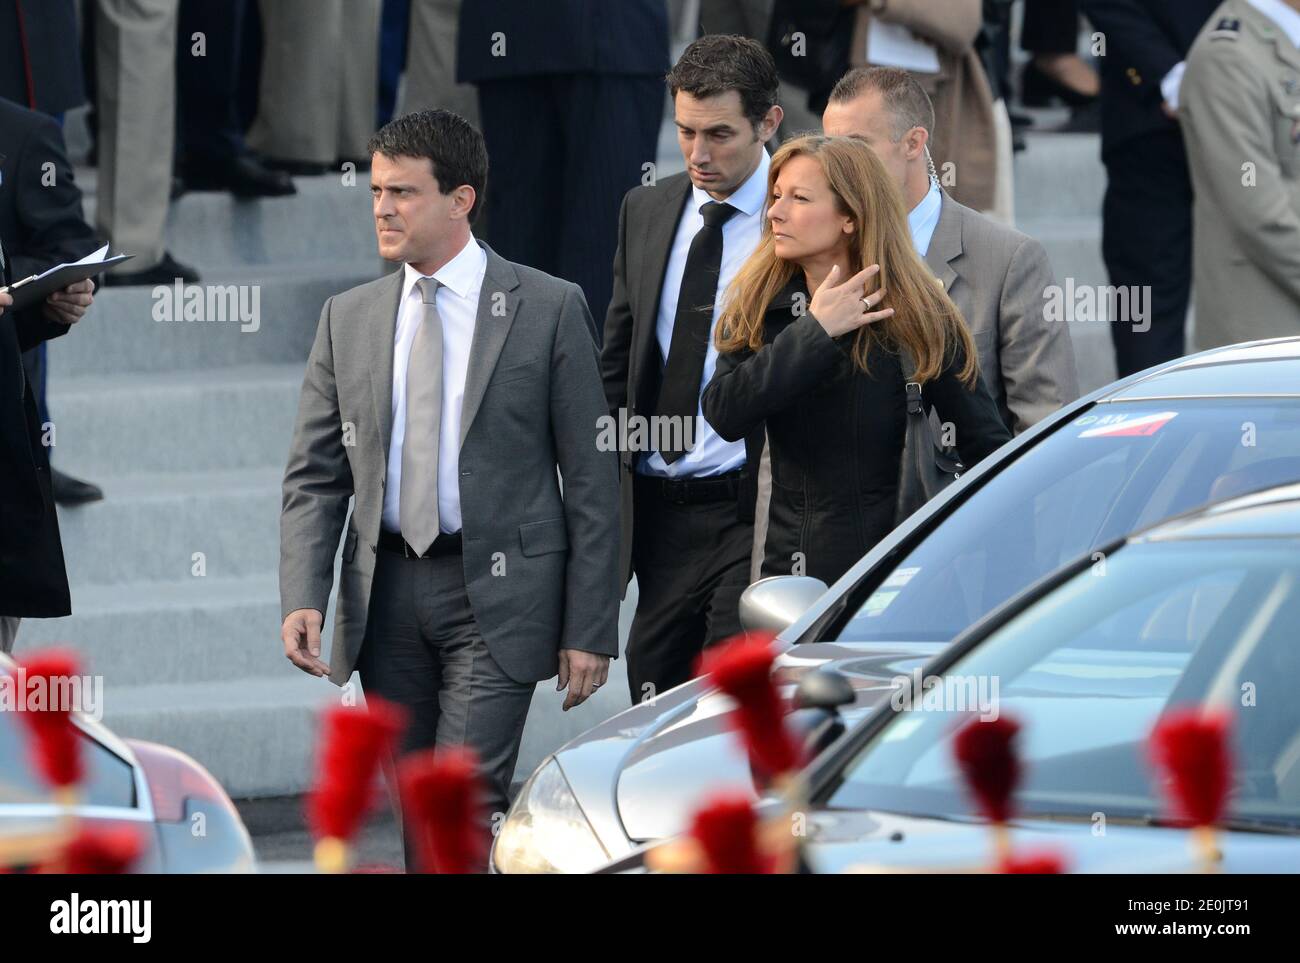 French Interior Minister Manuel Valls and his wife Anne Gravoin attend the Concorde Place in Paris, France, on July 14, 2012 during 2012 Annual Military Parade at the Champs Elysees. Photo by Mousse/ABACAPRESS.COM Stock Photo